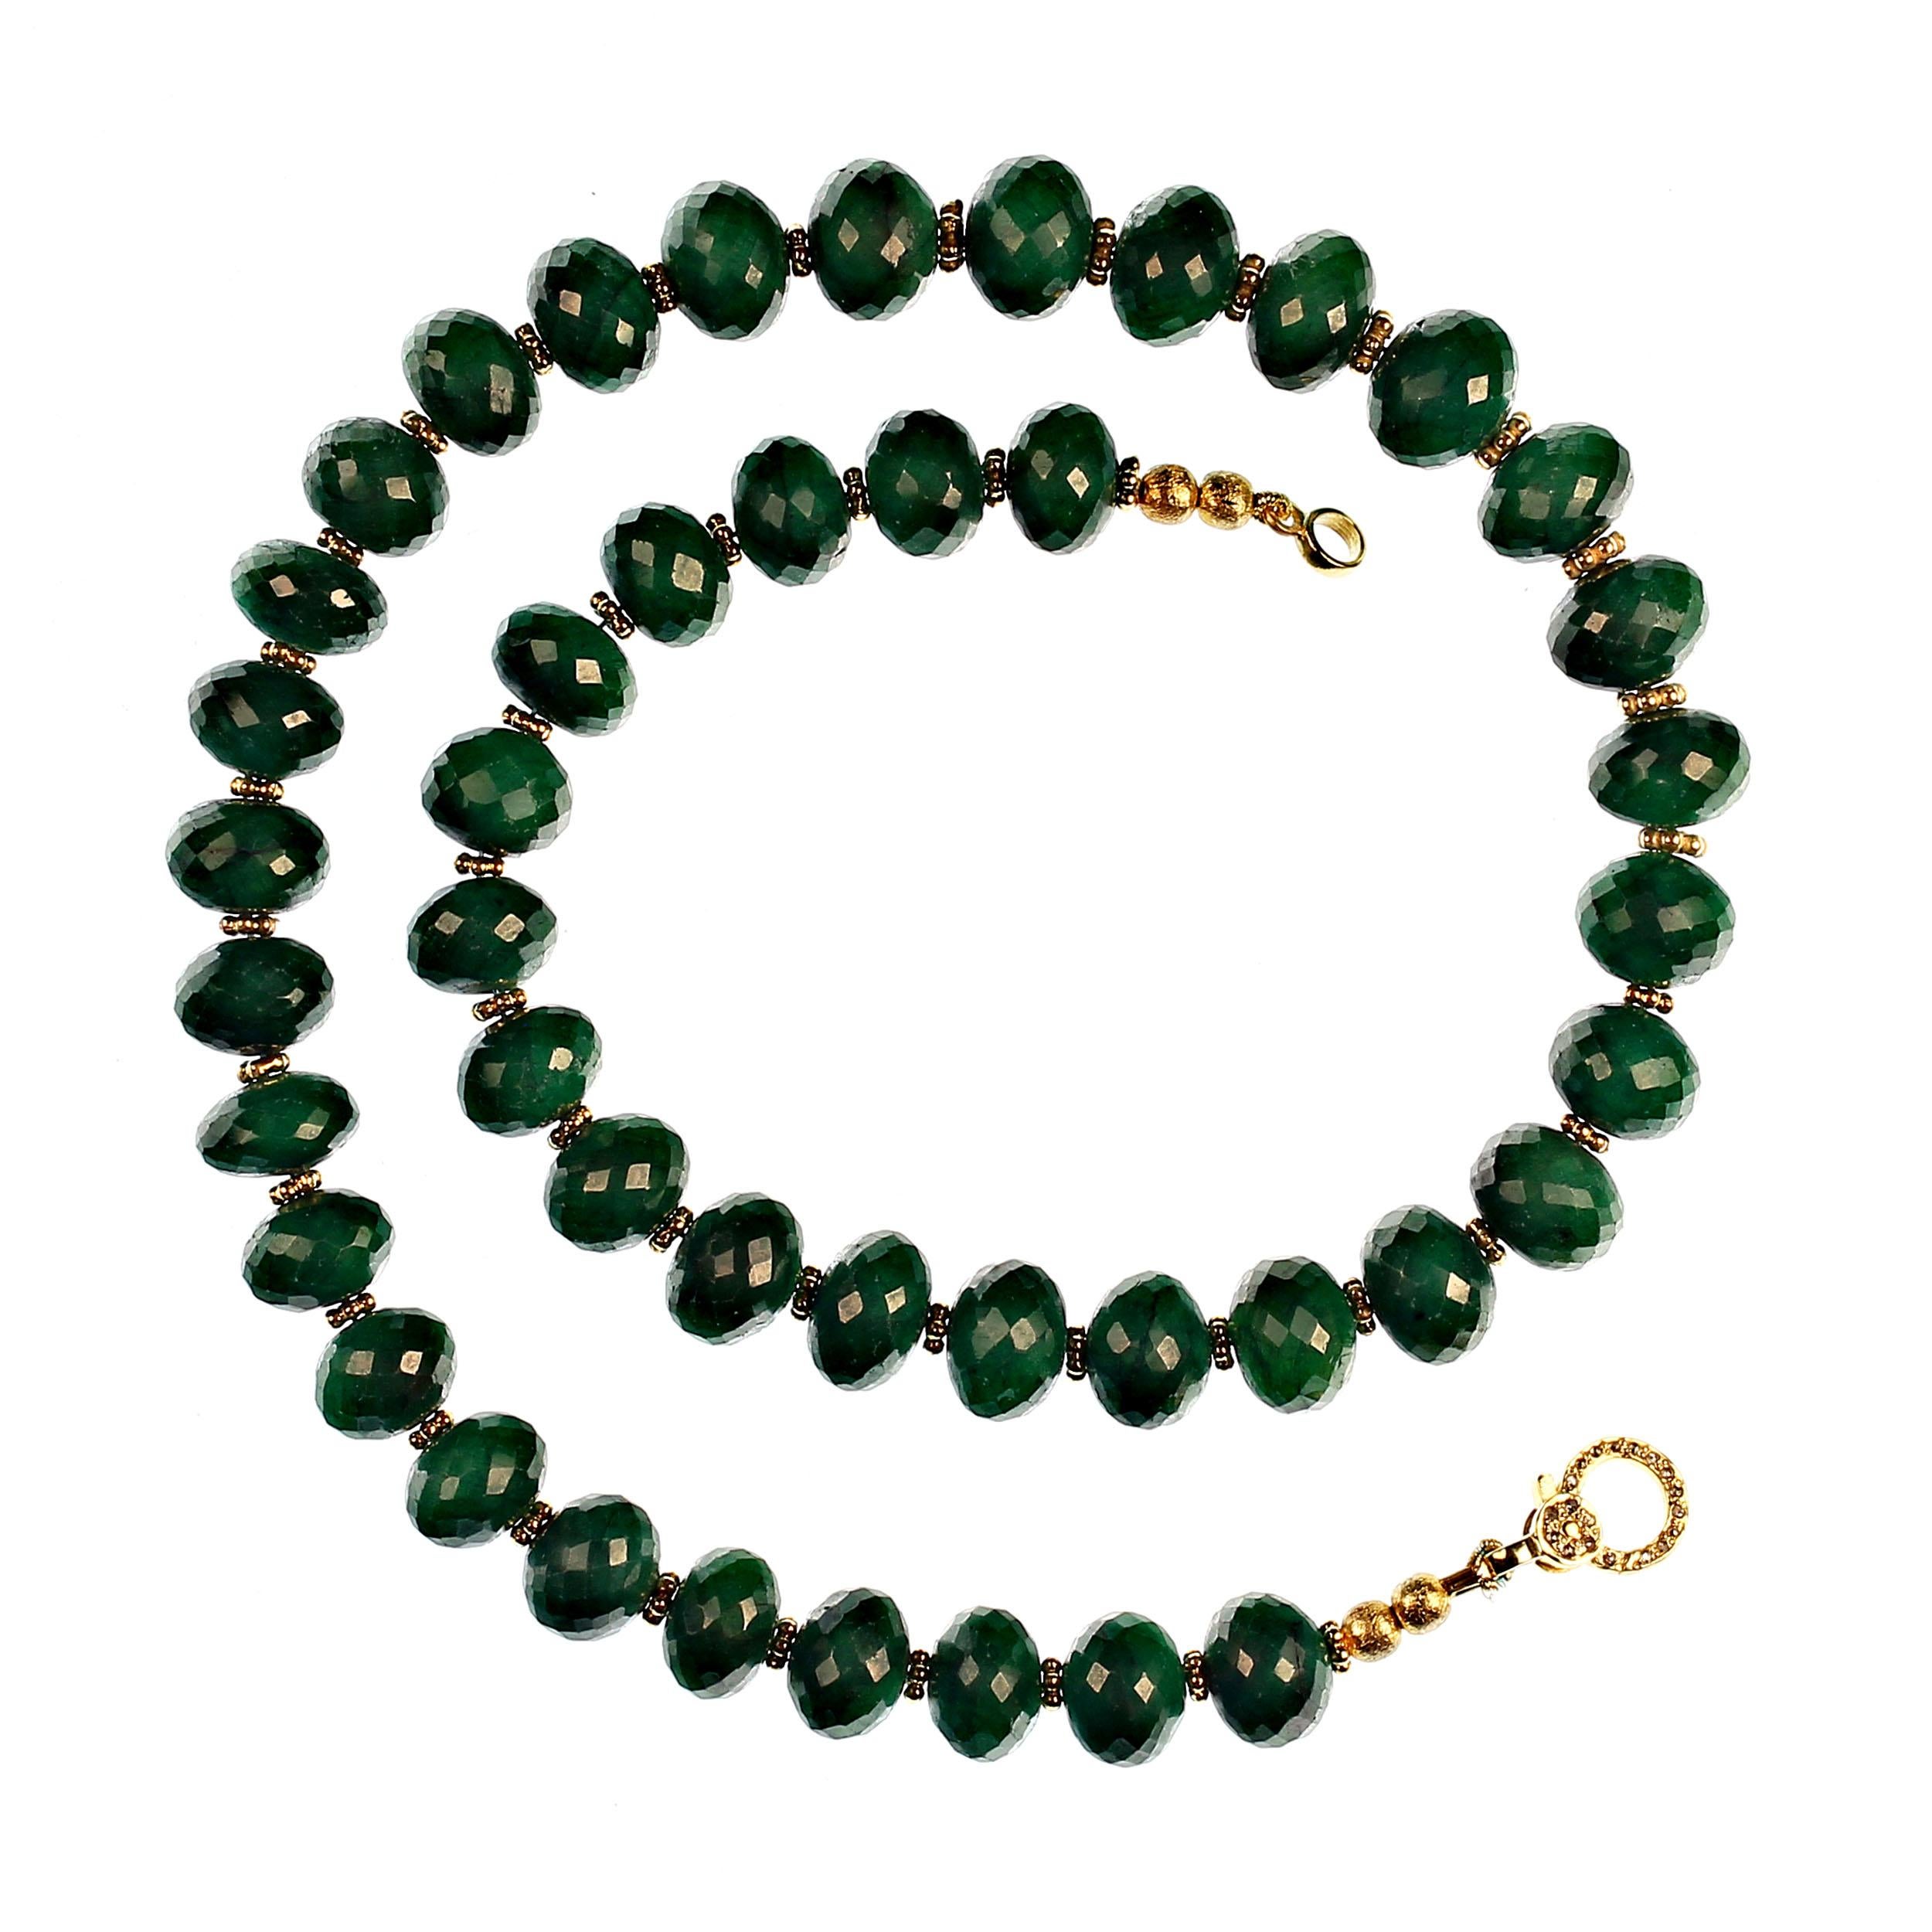 Bead AJD Simply Elegant Emerald necklace with goldy accents 18 Inch For Sale